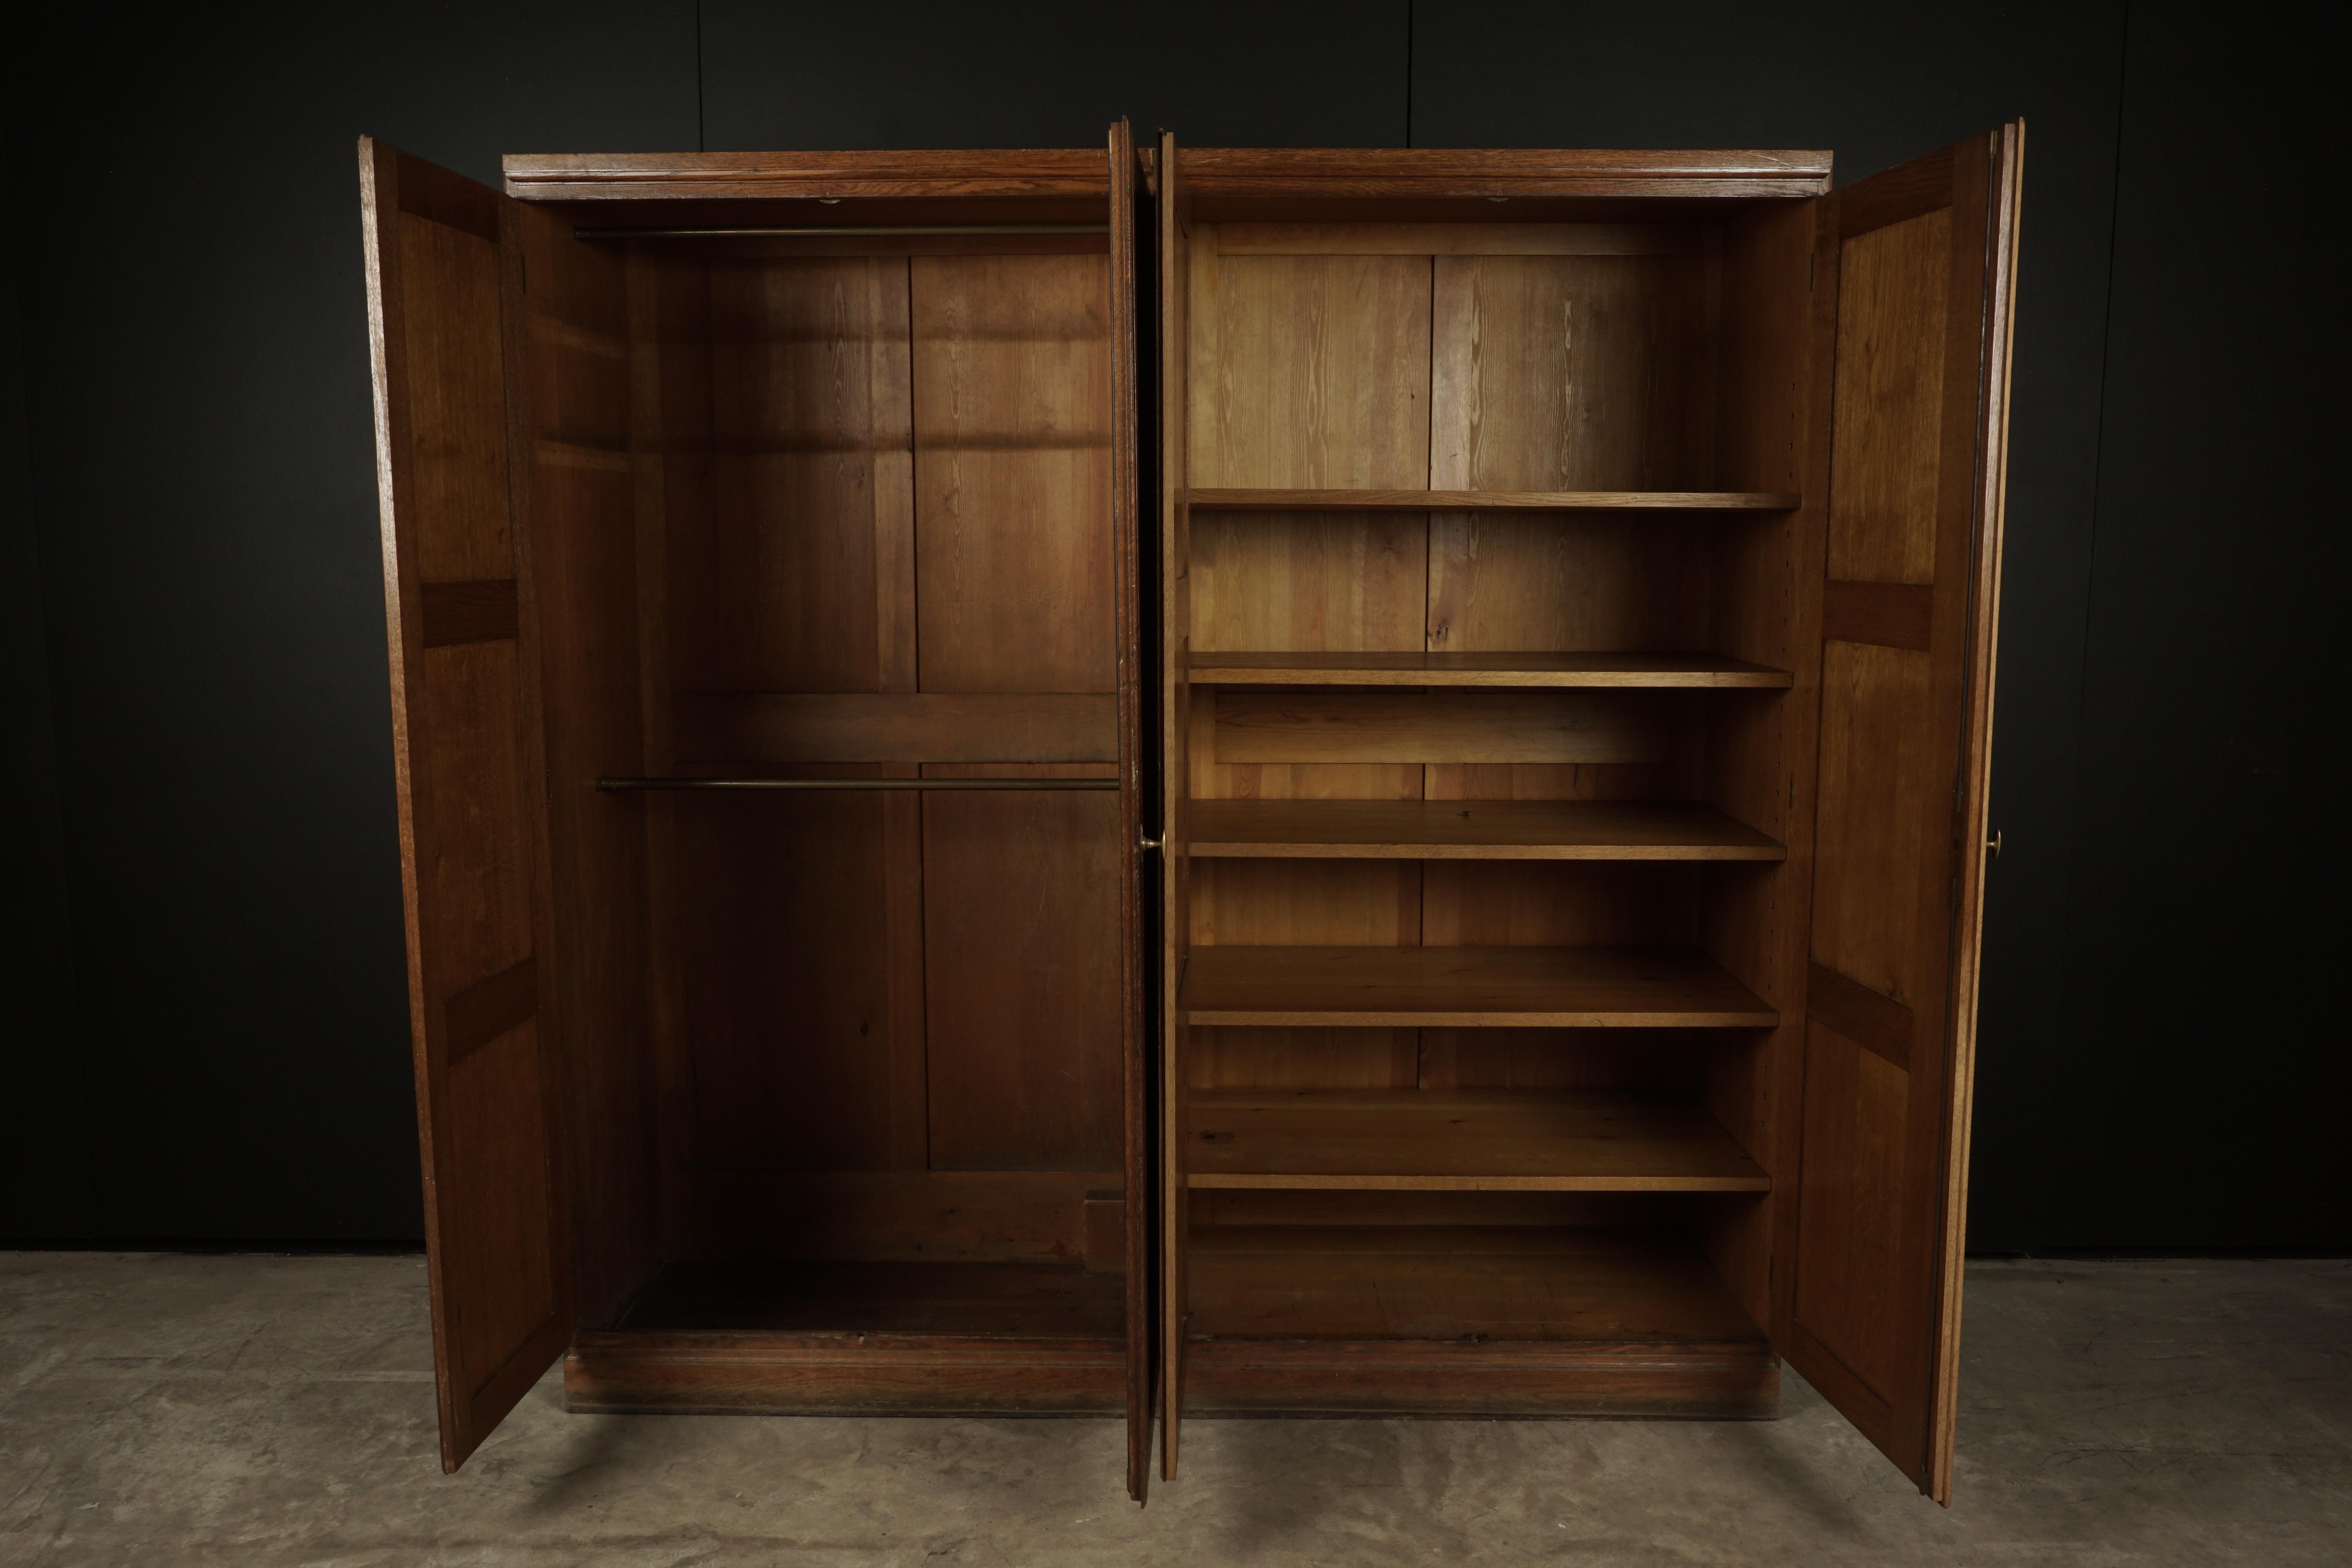 Rare pair of large oak wardrobe cabinets from Denmark, circa 1950. Solid oak construction with original hardware. Unusual model manufactured by Red Rasmussen, Denmark. Original label on the back.